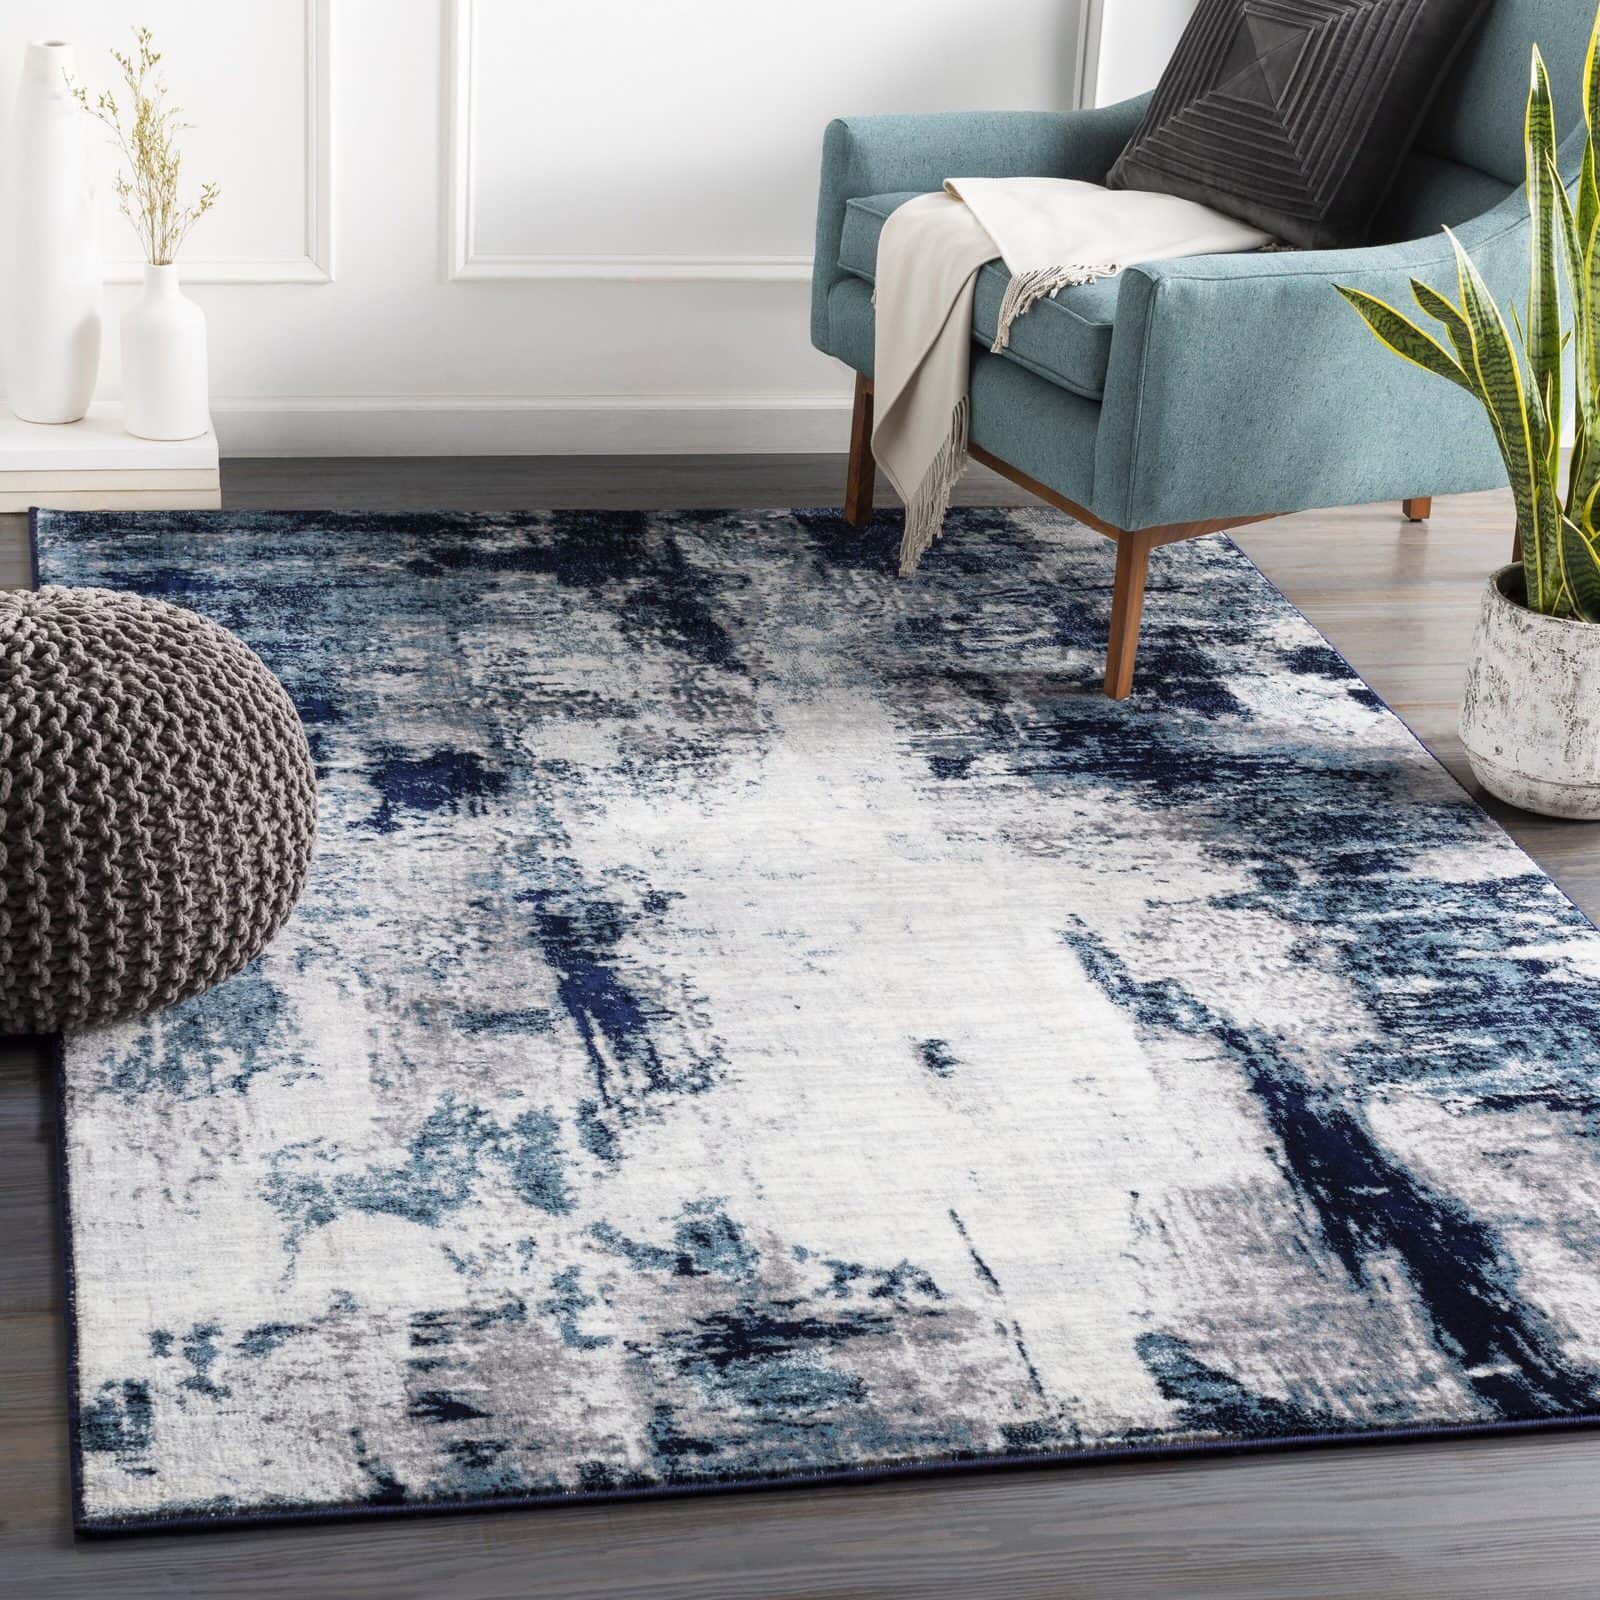 12 Best Navy Blue And White Rugs, White And Grey Rug